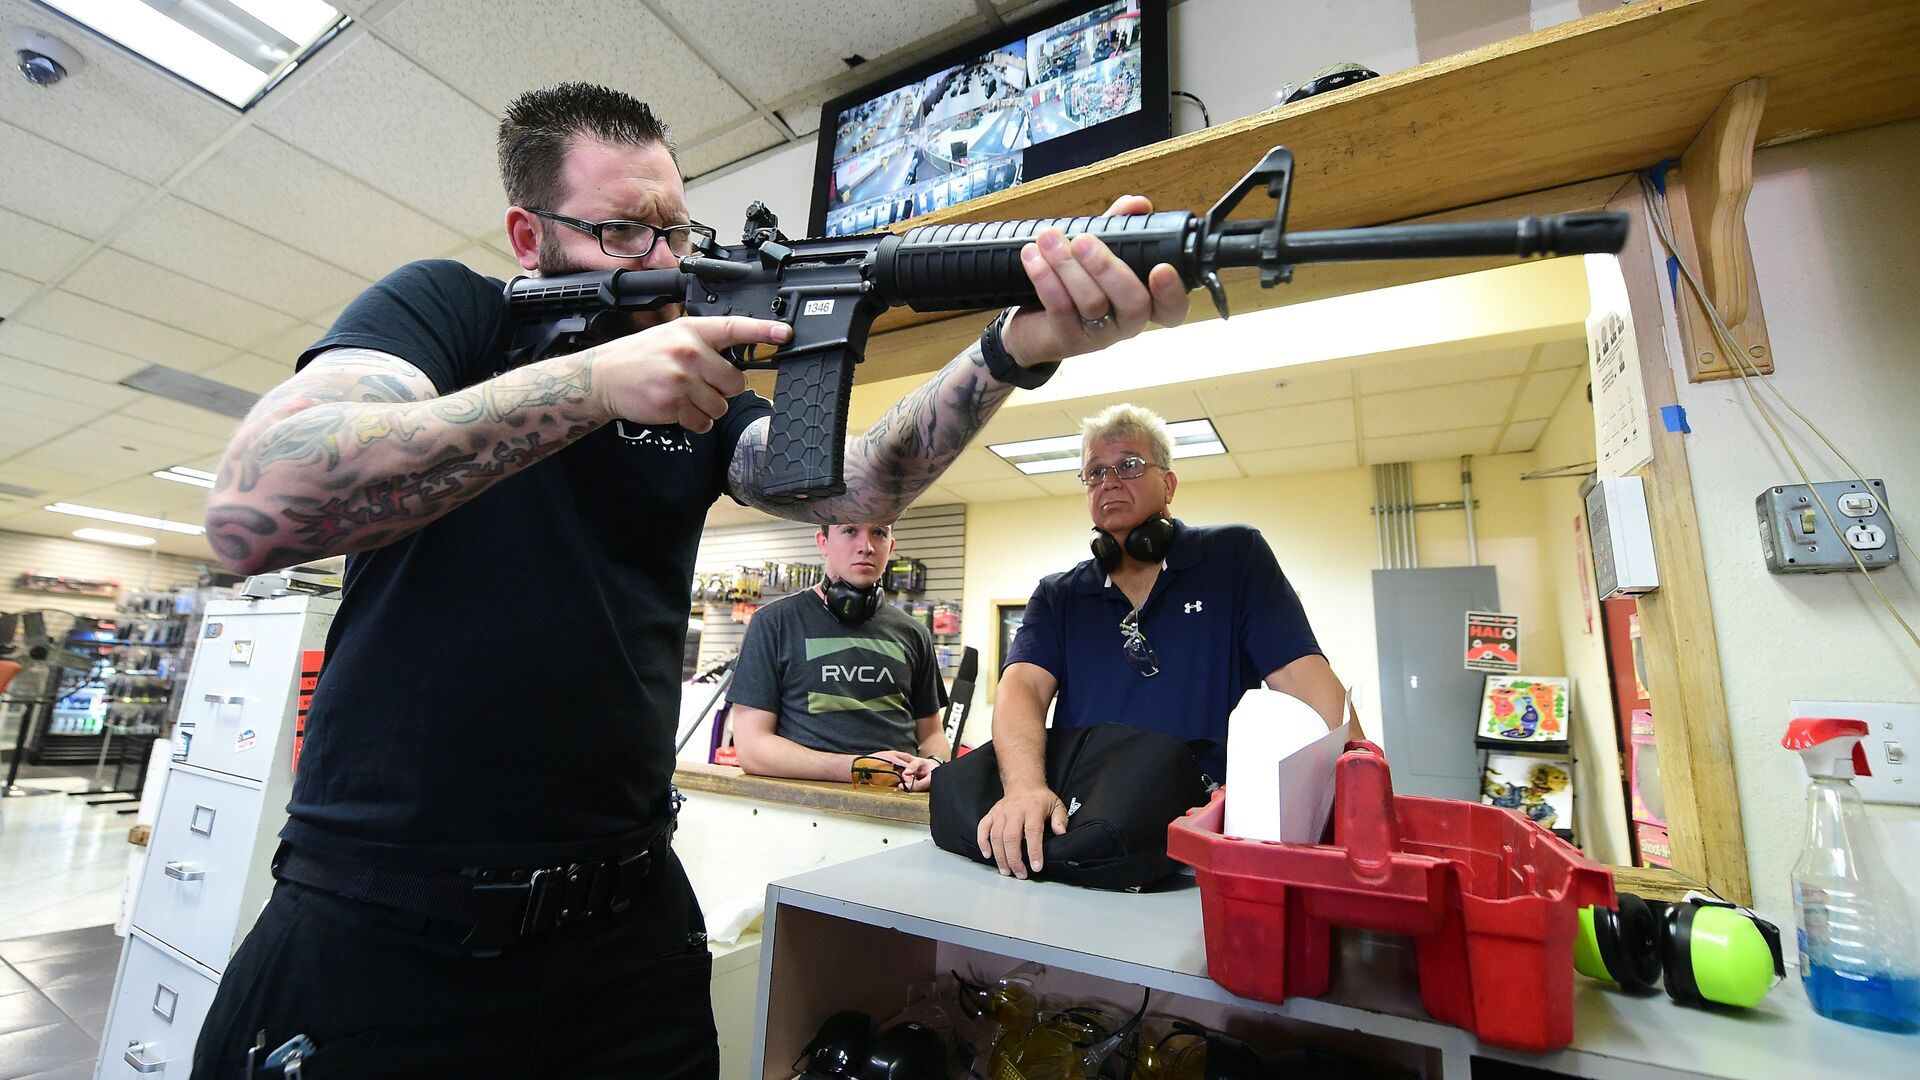 LAX Firing Range employee Tommy Bushnell demonstrates how to use an AR15 rifle to gun enthusiasts waiting to shoot at targets in Inglewood, California on September 7, 2016 - Sputnik International, 1920, 03.06.2022